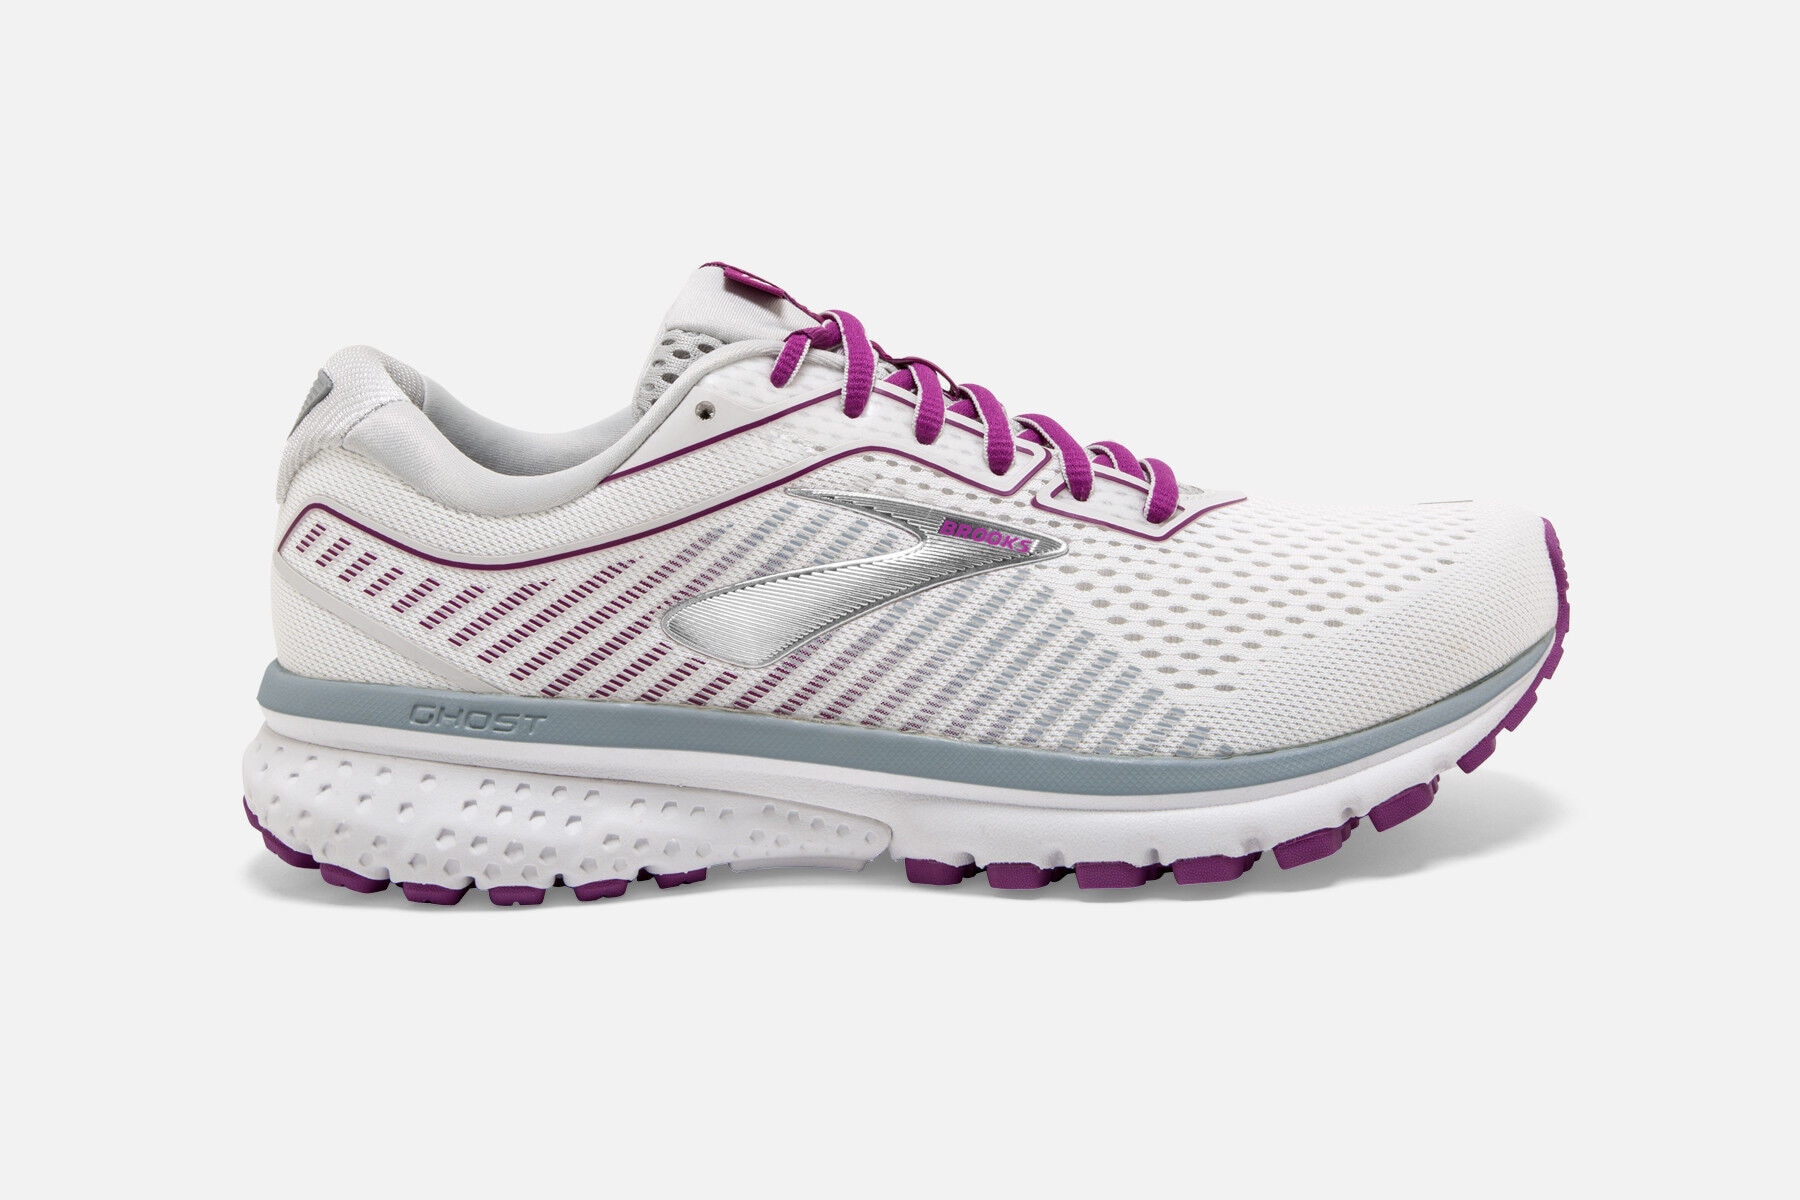 brooks womens neutral shoes